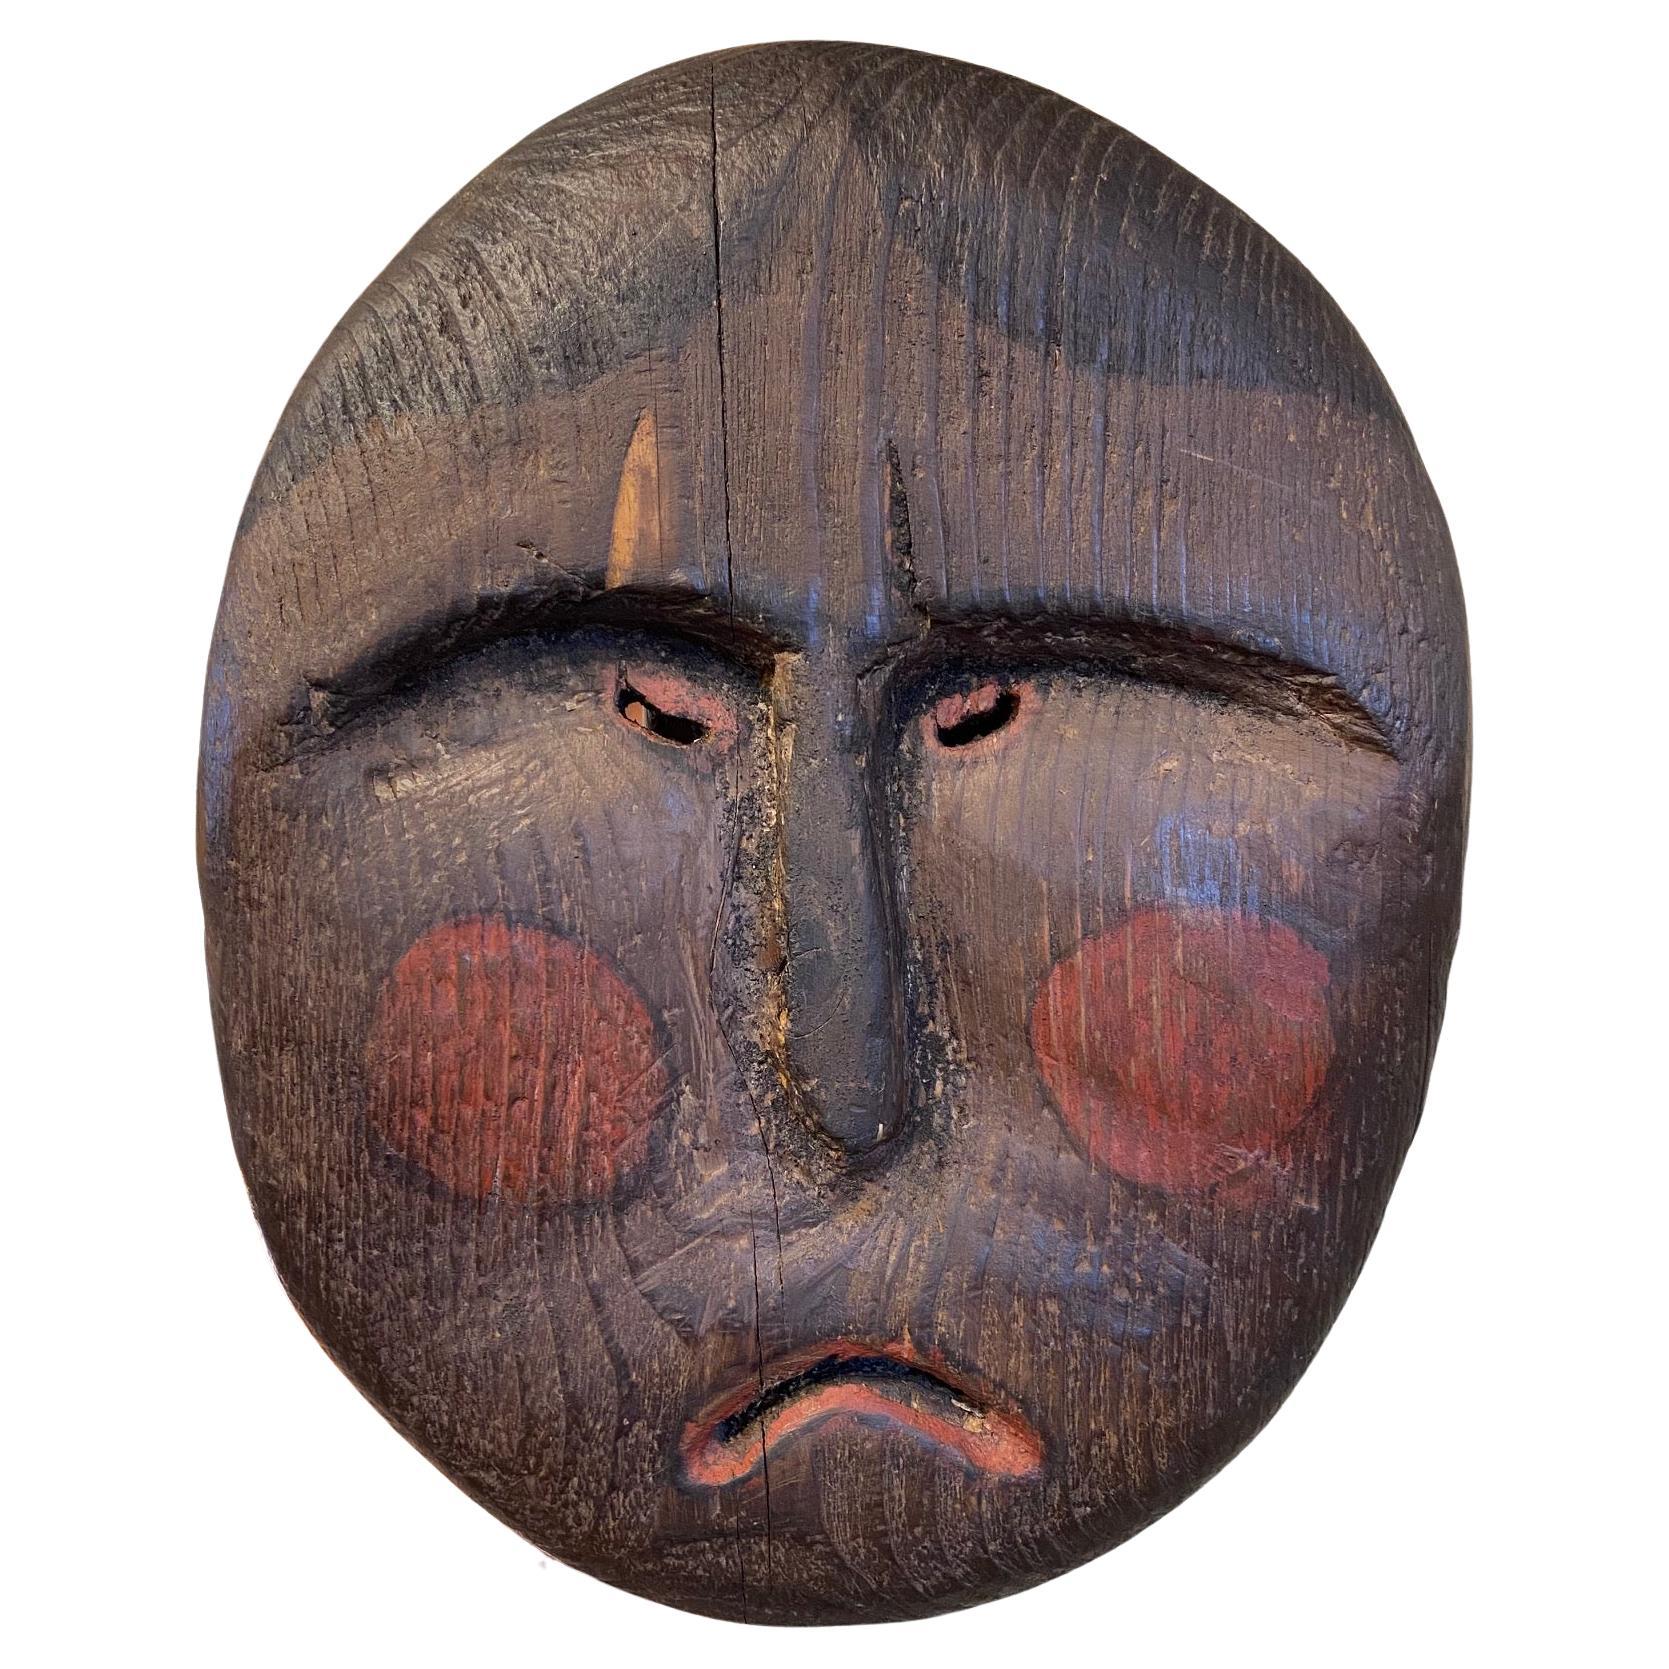 Pacific Northwest Coast Carved and Polychromed Wooden Mask, Early 20th Century